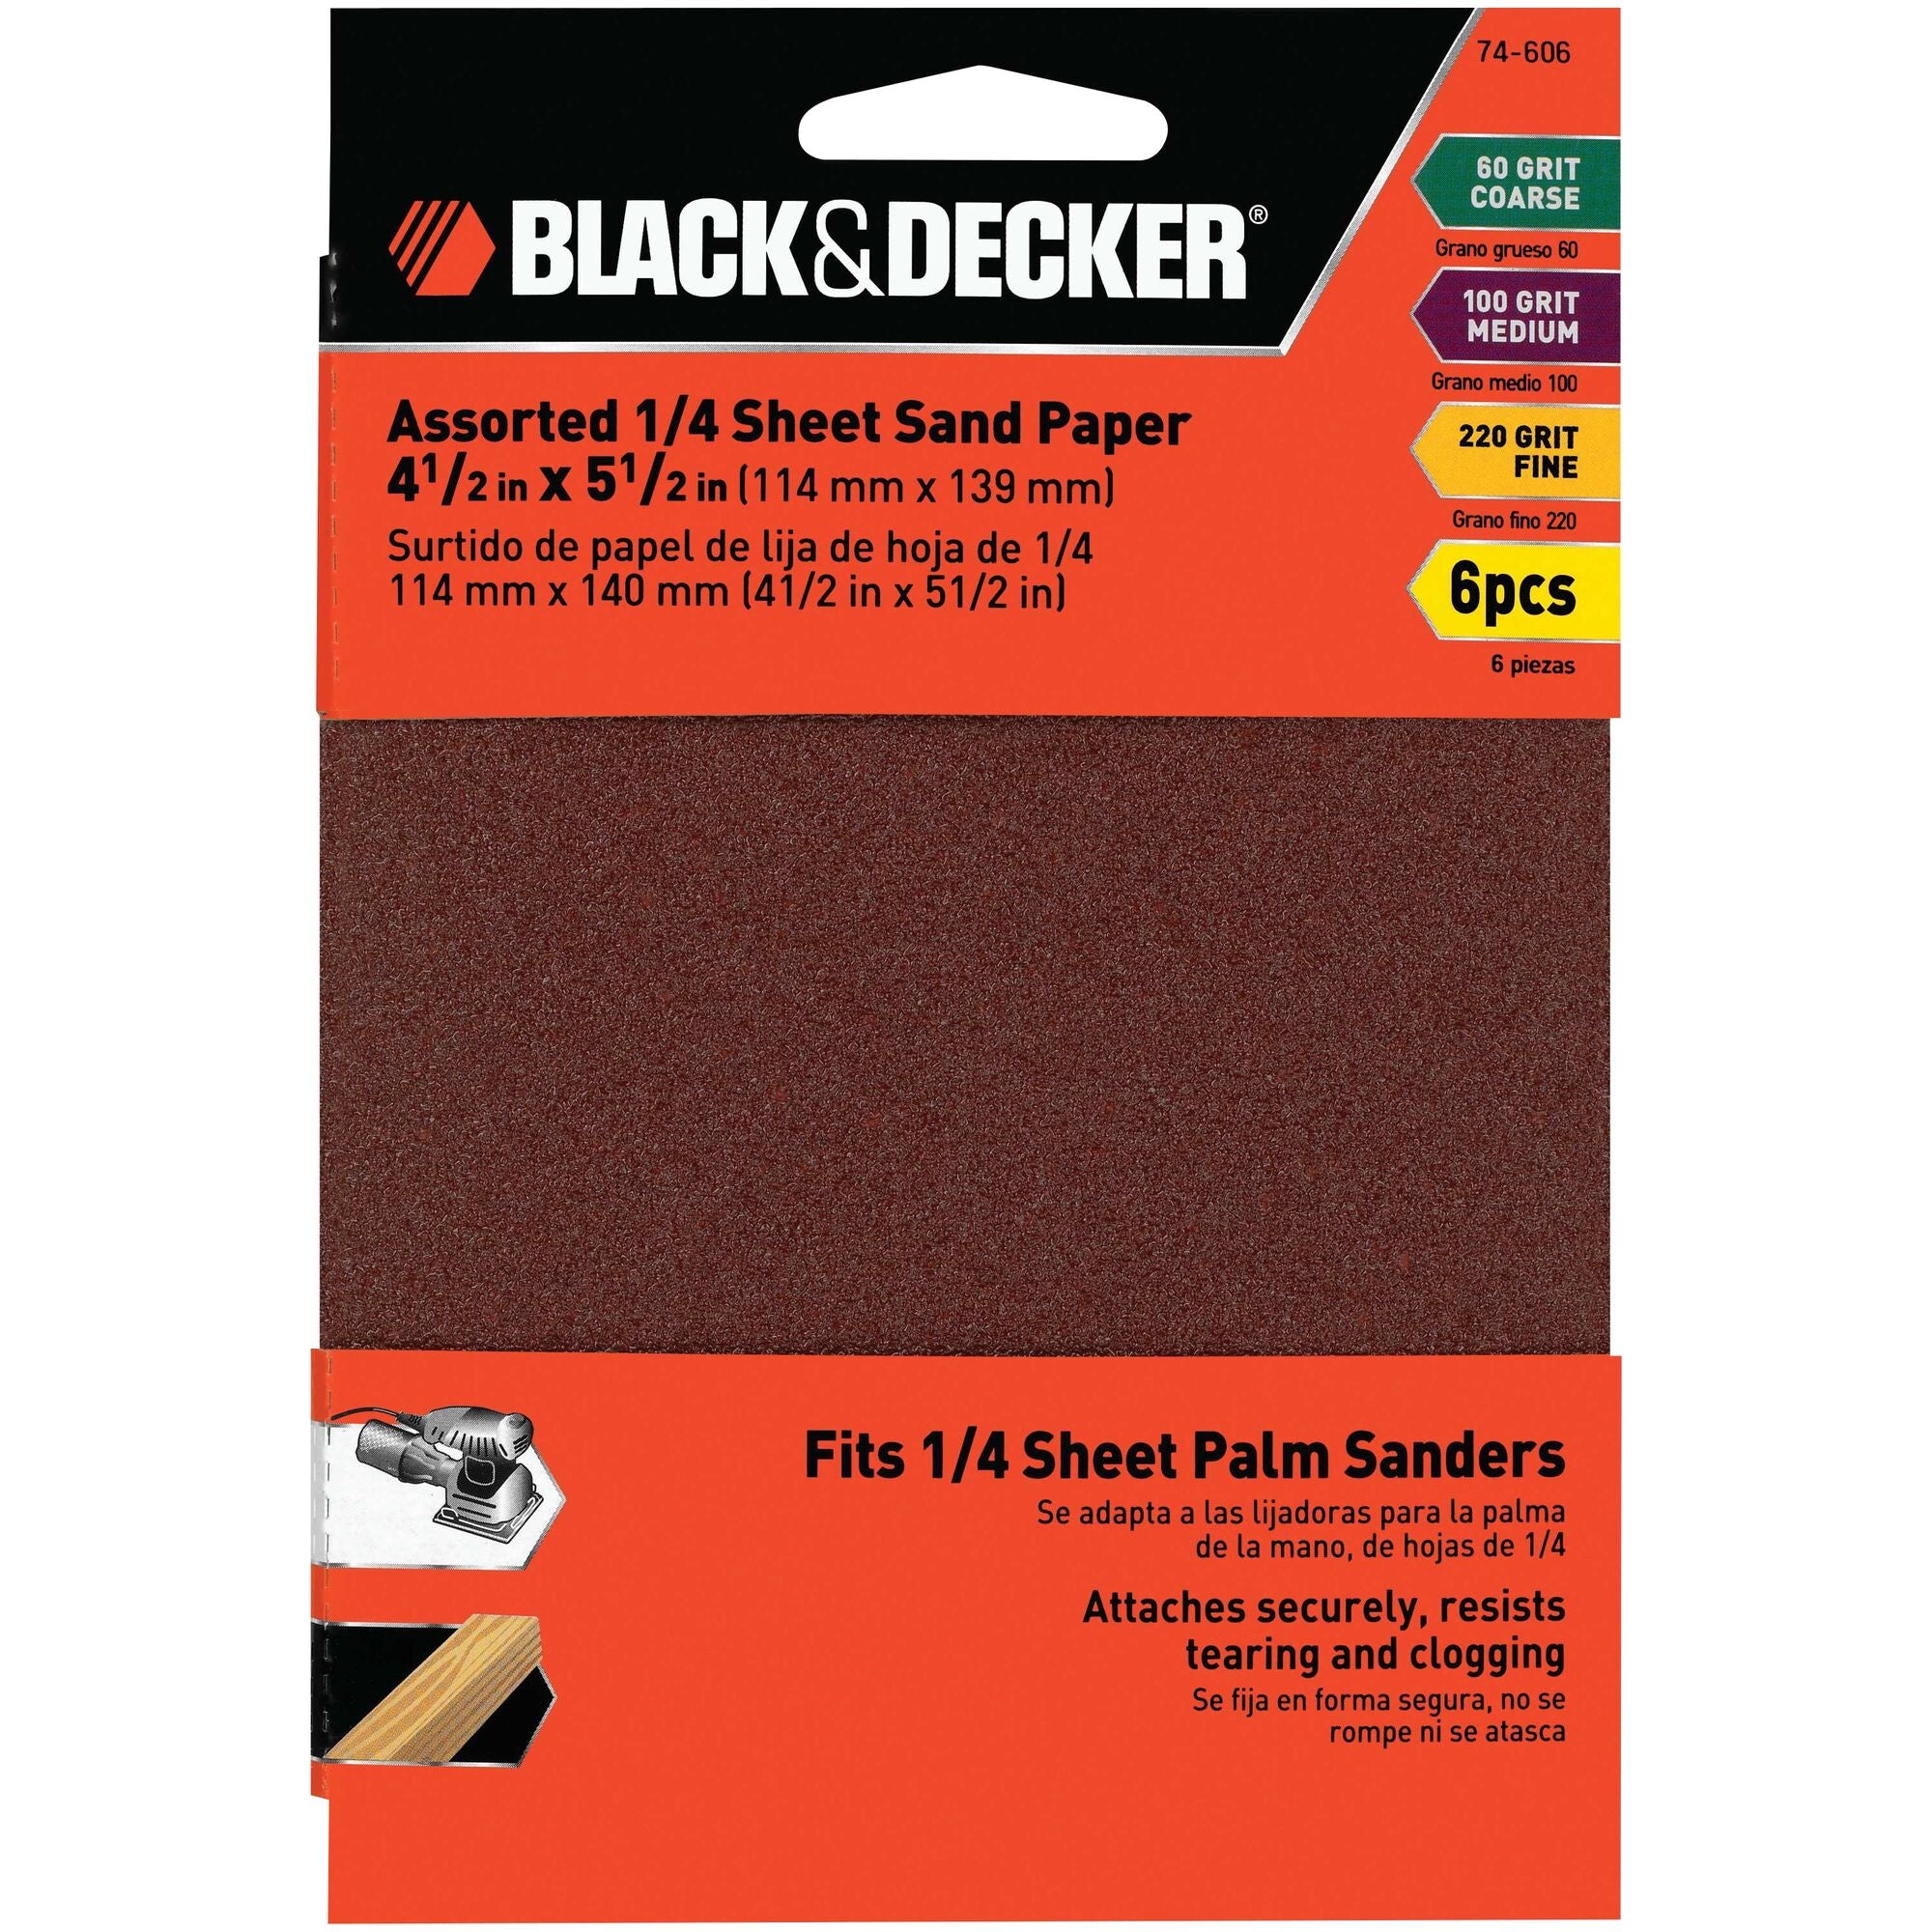 Black & Decker 74-586H Assorted Finishing/Detail Sandpaper with Tips,  5-Pack 